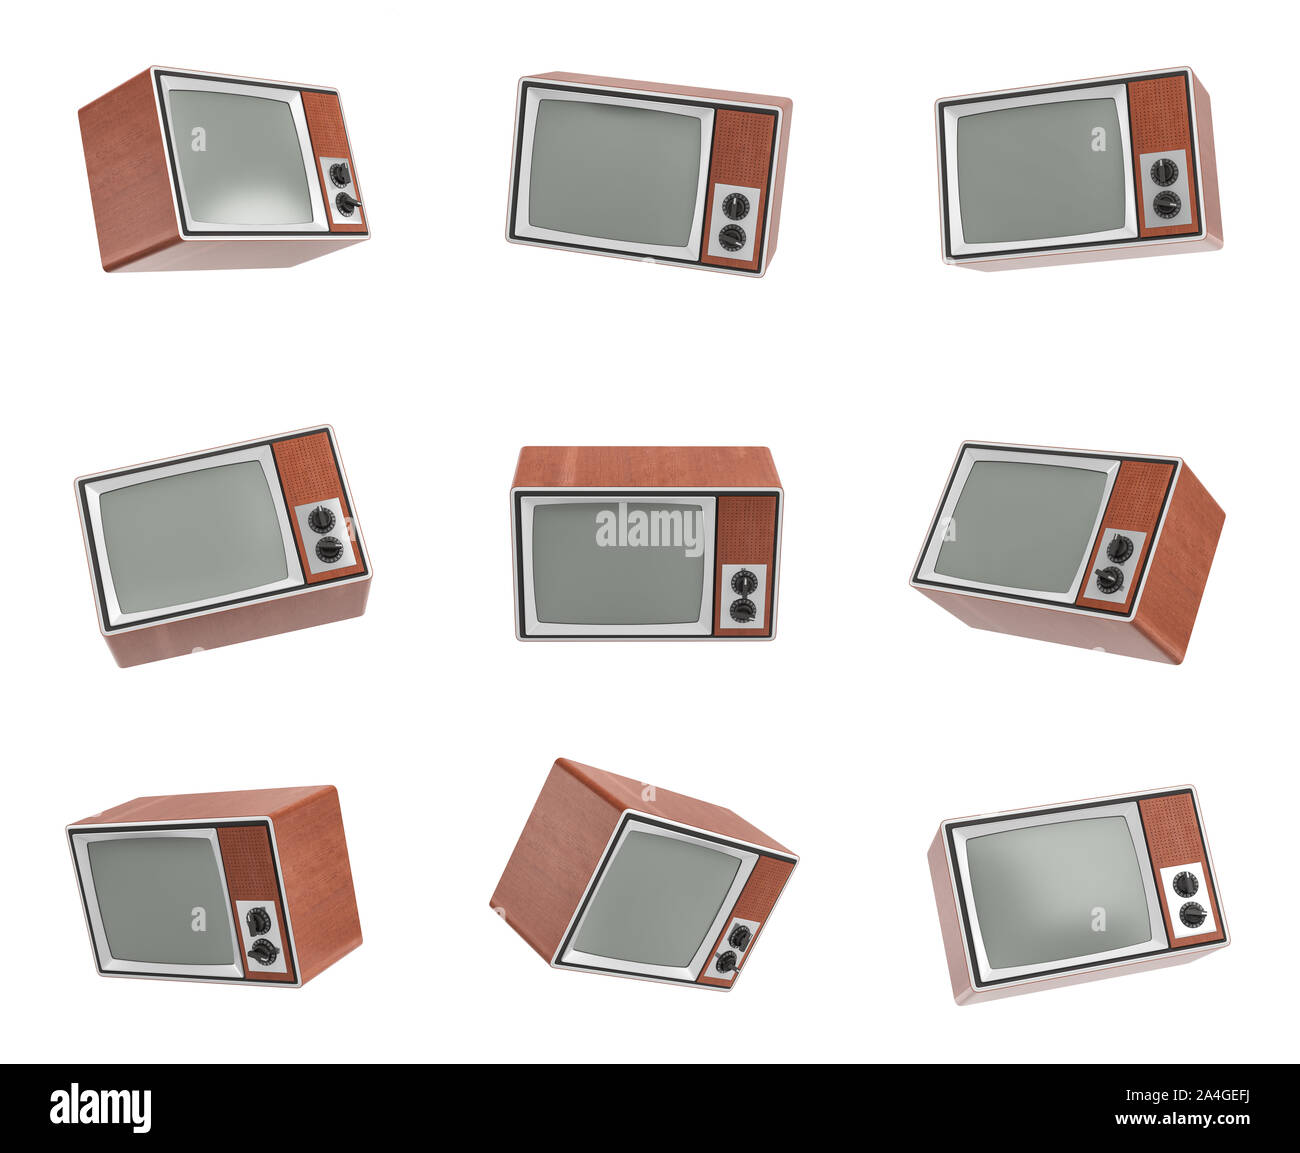 3d rendering of a turned-off retro TV in different angle on white background. Stock Photo